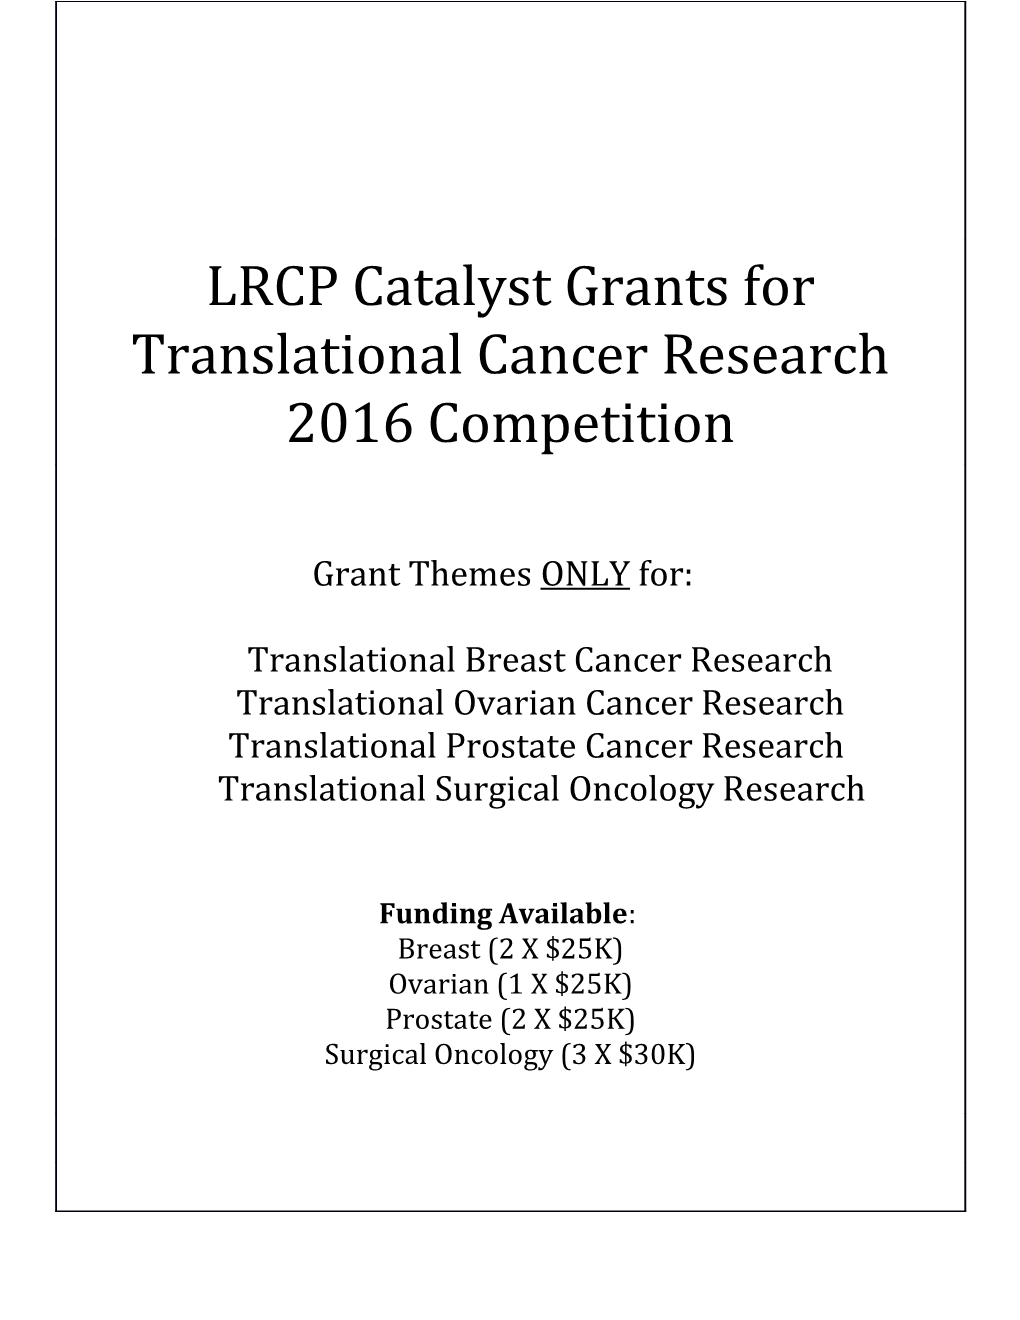 LRCP Catalyst Grants for Translational Cancer Research 2016 Competition